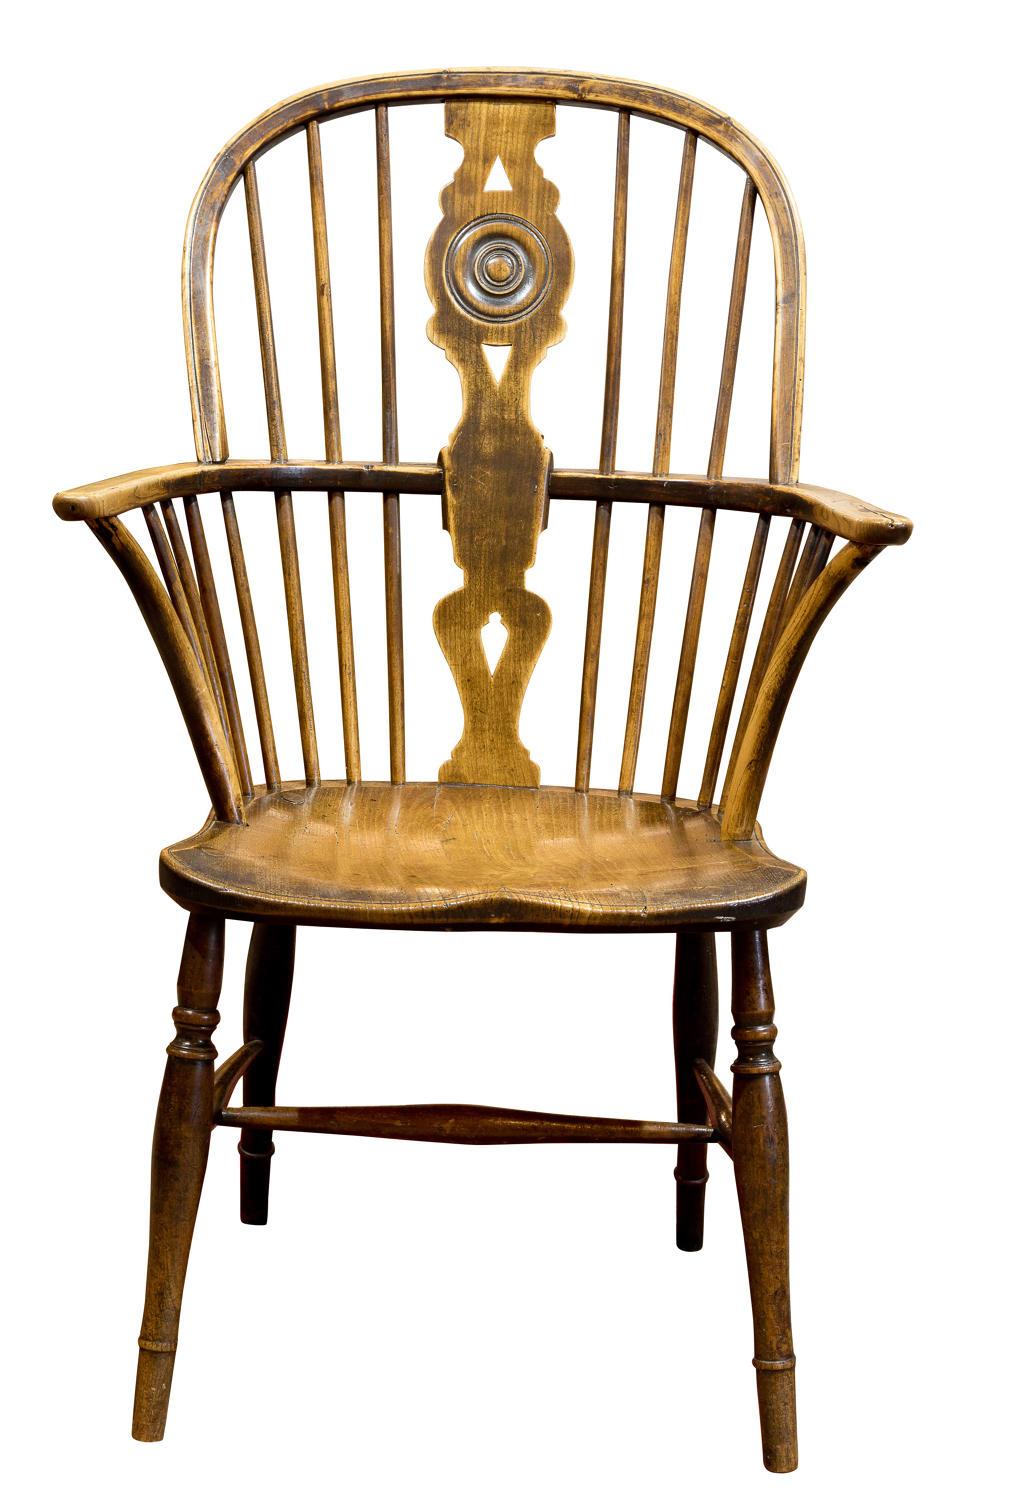 An early 19th century draft-back Windsor chair constructed in beech, ash and with an elm seat,

circa 1820.